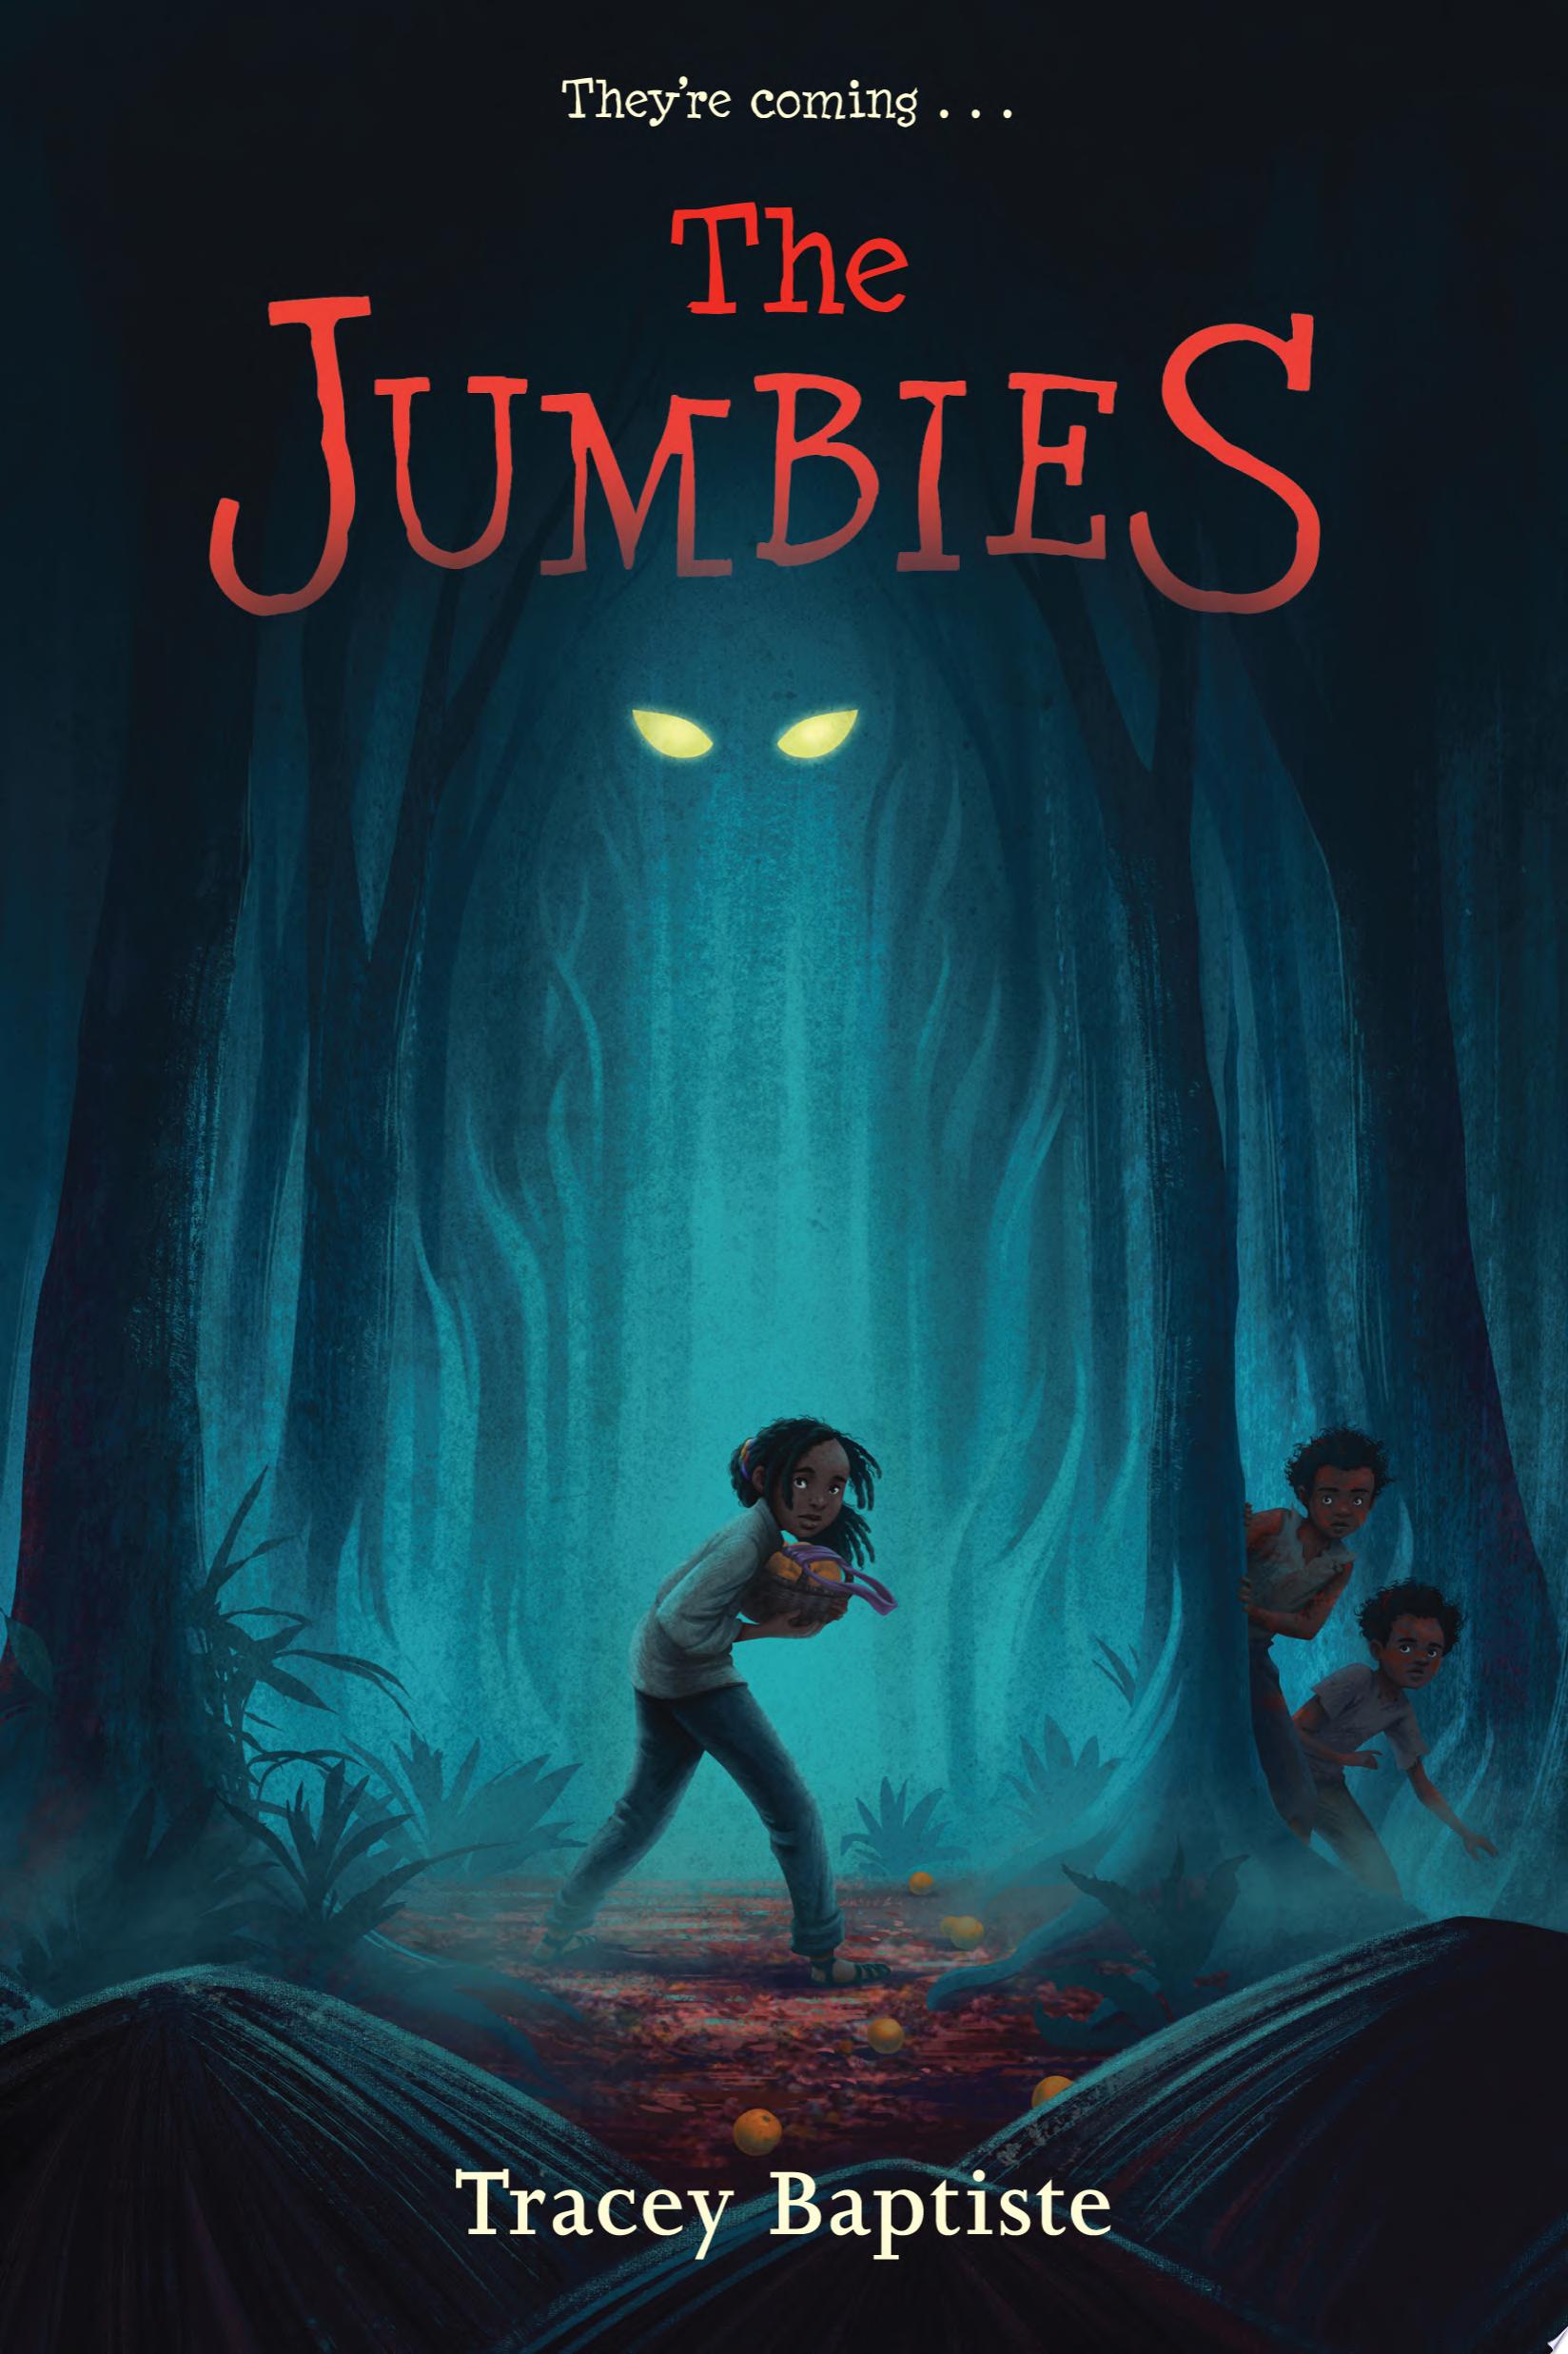 Image for "The Jumbies"